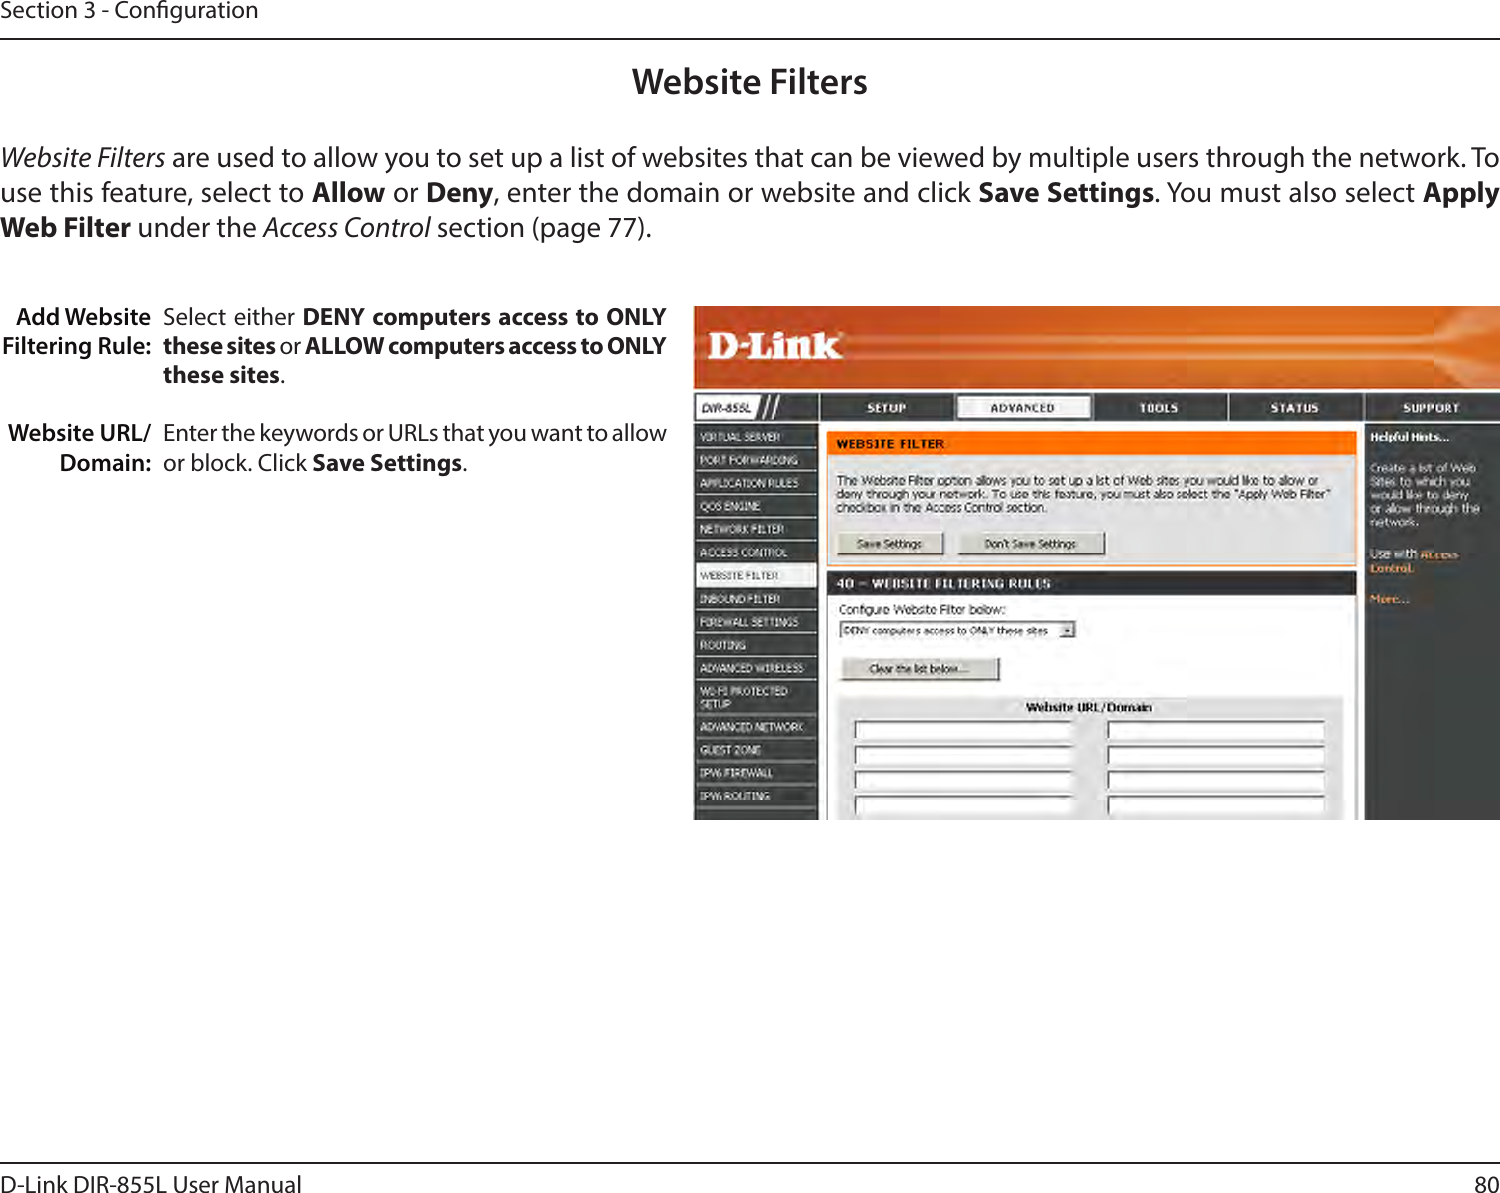 80D-Link DIR-855L User ManualSection 3 - CongurationAdd Website Filtering Rule:Website URL/Domain:Website FiltersSelect either DENY computers access to ONLY these sites or ALLOW computers access to ONLY these sites.Enter the keywords or URLs that you want to allow or block. Click Save Settings.Website Filters are used to allow you to set up a list of websites that can be viewed by multiple users through the network. To use this feature, select to Allow or Deny, enter the domain or website and click Save Settings. You must also select Apply WebFilter under the Access Control section (page 77).